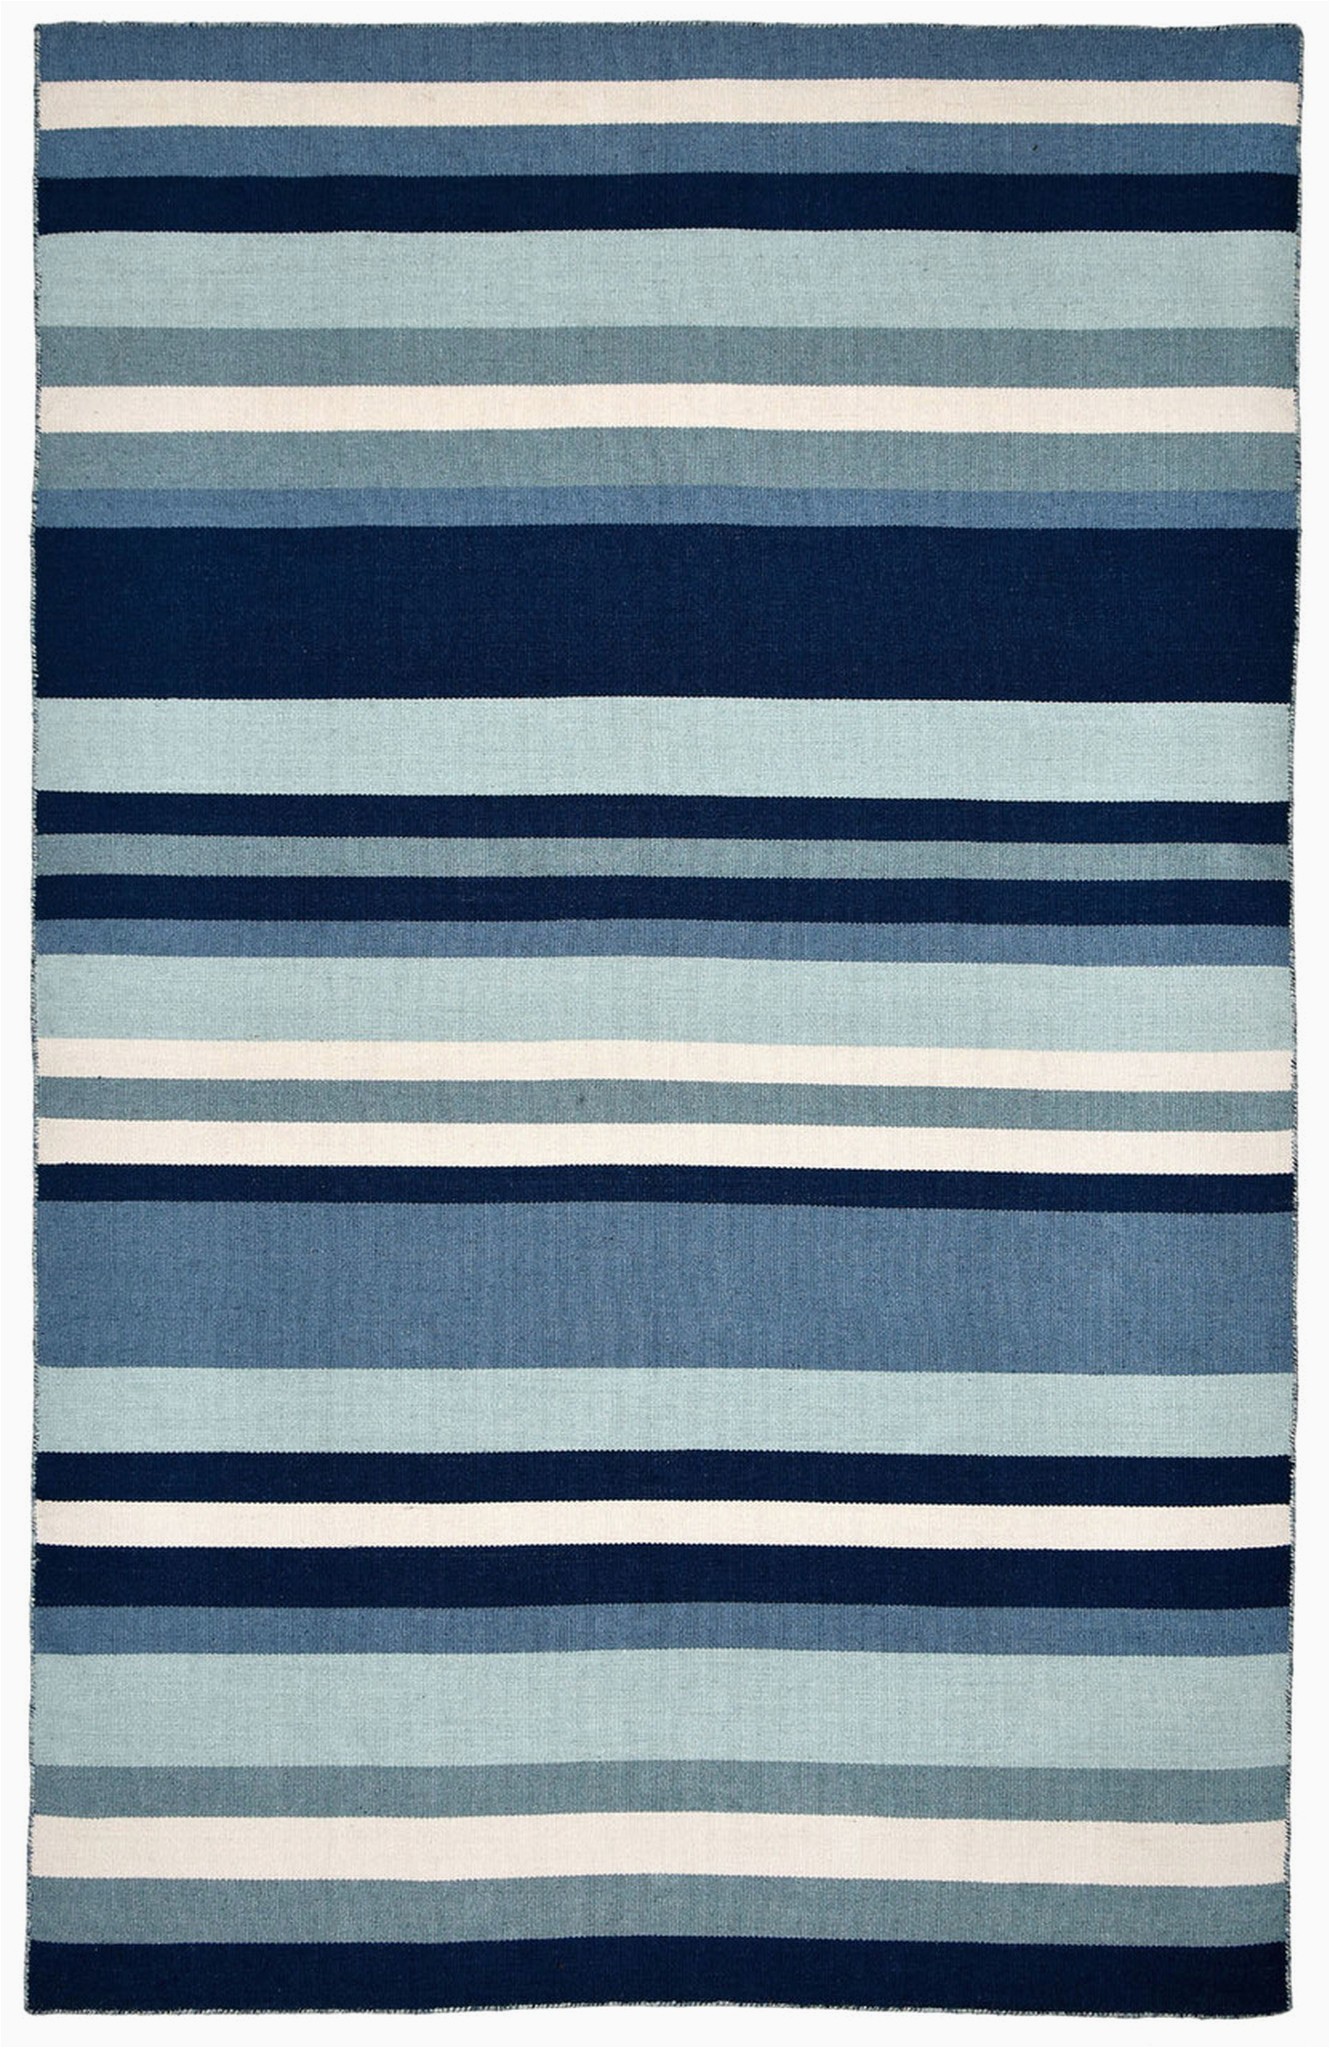 Blue and Gray Striped Rug Tribeca Water Blue Striped Woven Indoor Outdoor Rug